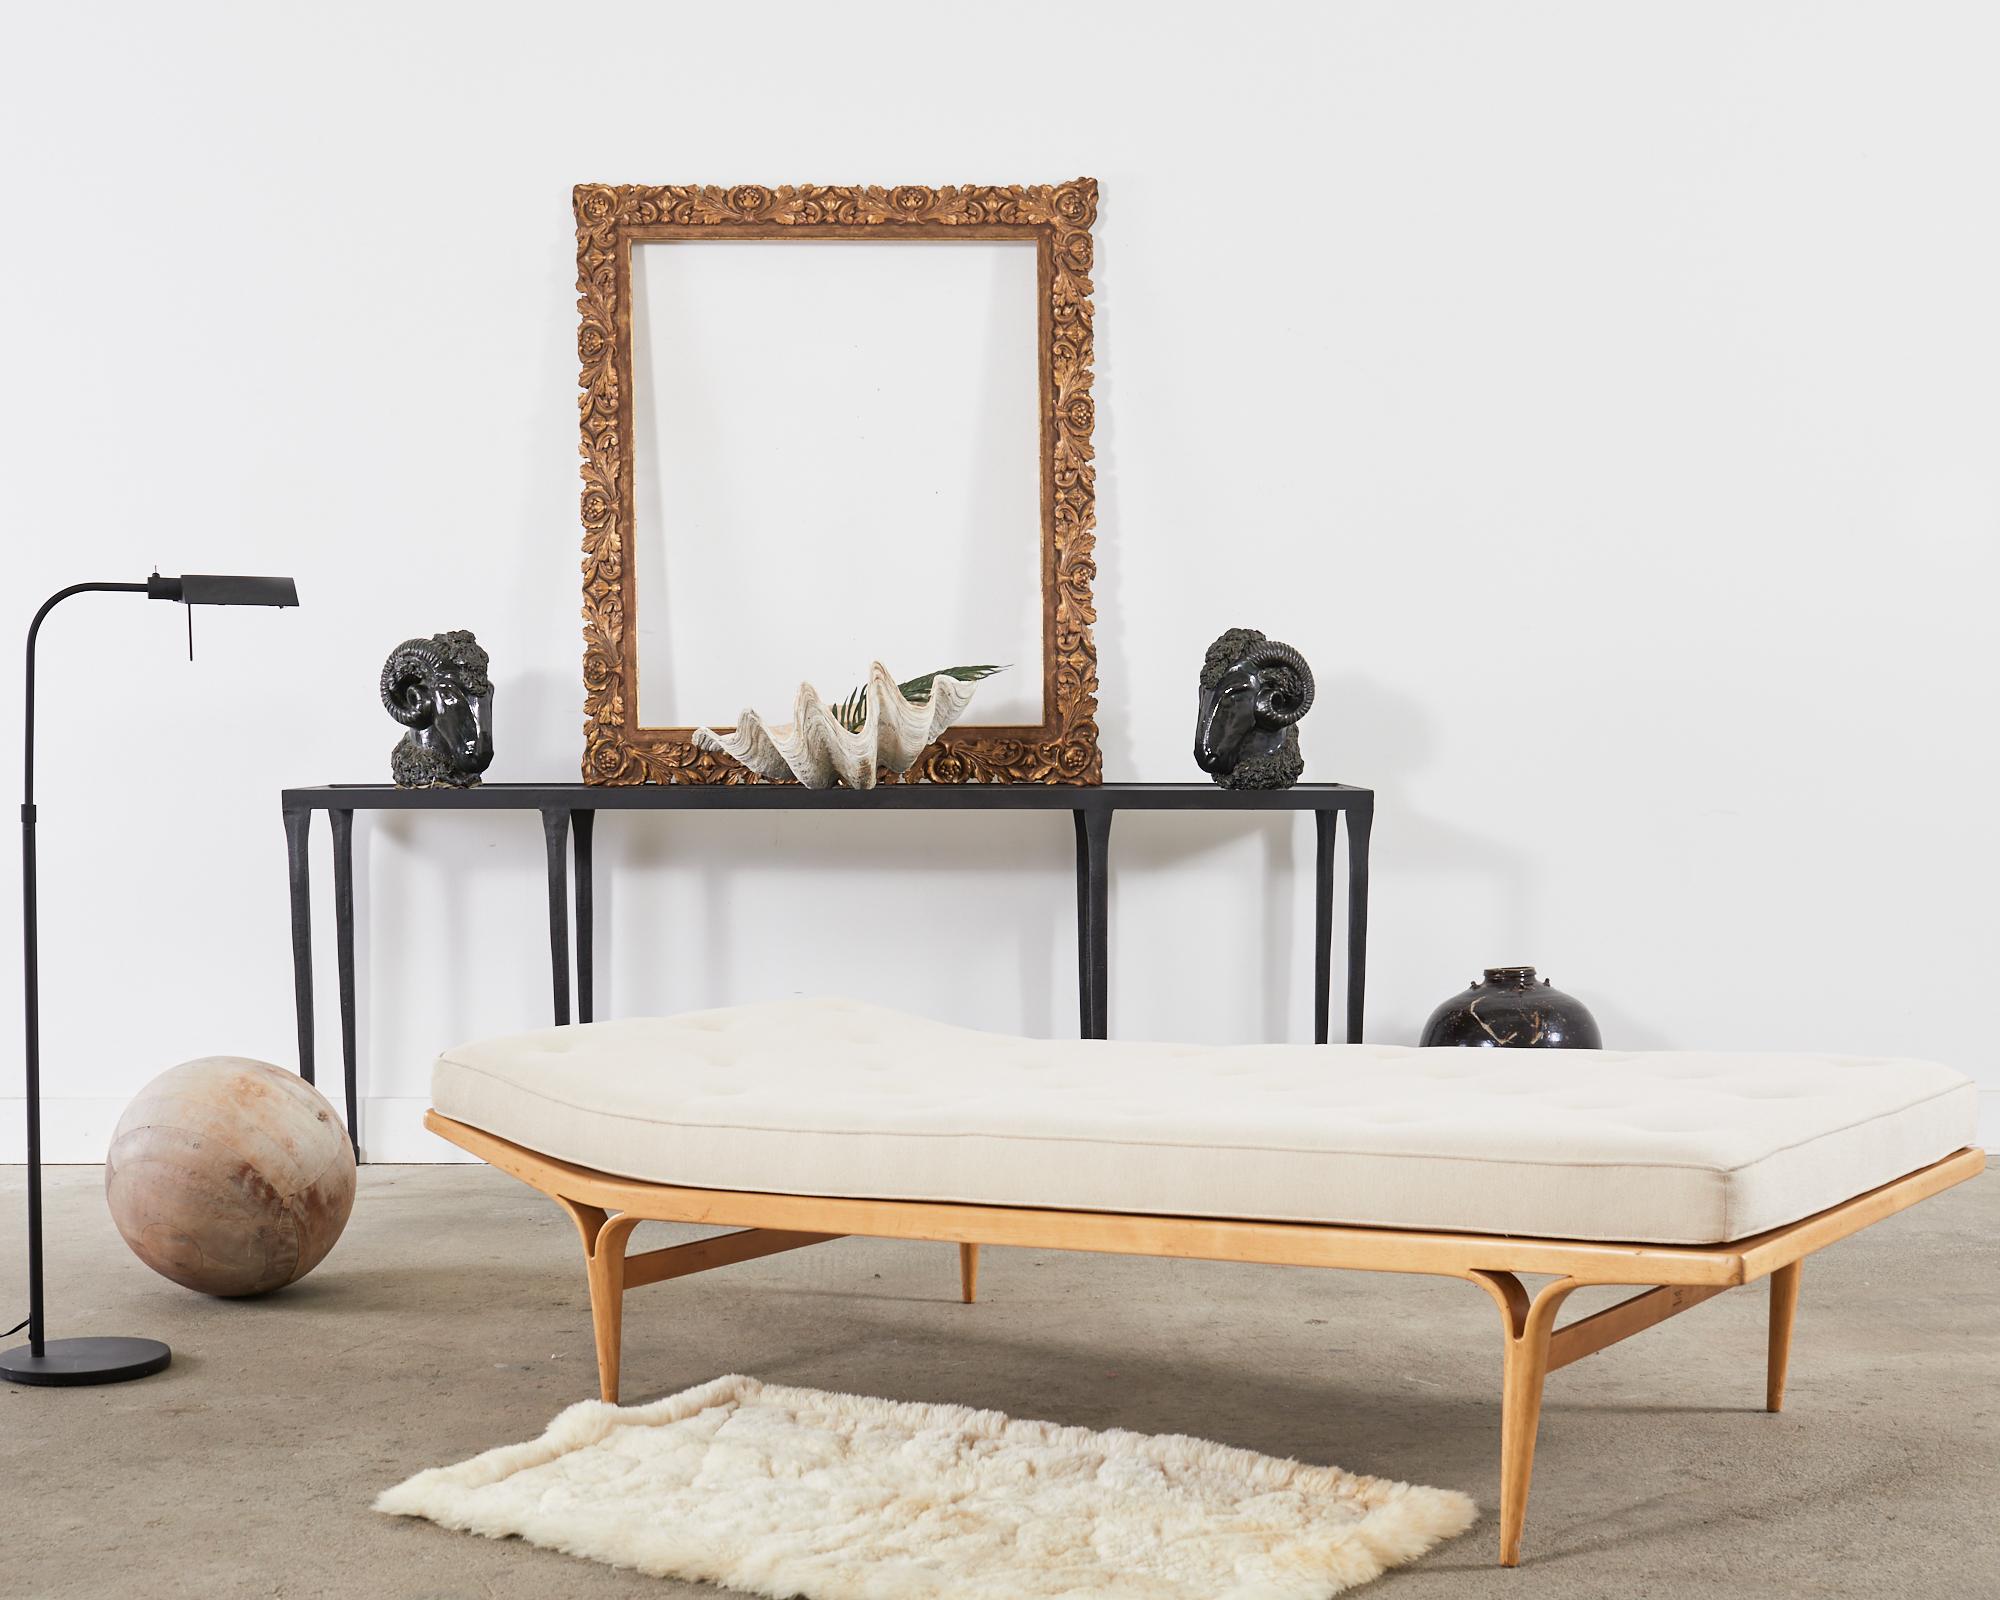 Sublime stamped Berlin daybed model #T303 designed by Bruno Mathsson for Firma Karl Mathsson in Varnamo, Sweden 1960. Crafted from blonde beechwood in the Scandinavian modern style originally featured at the International Exhibition in Berlin 1957.